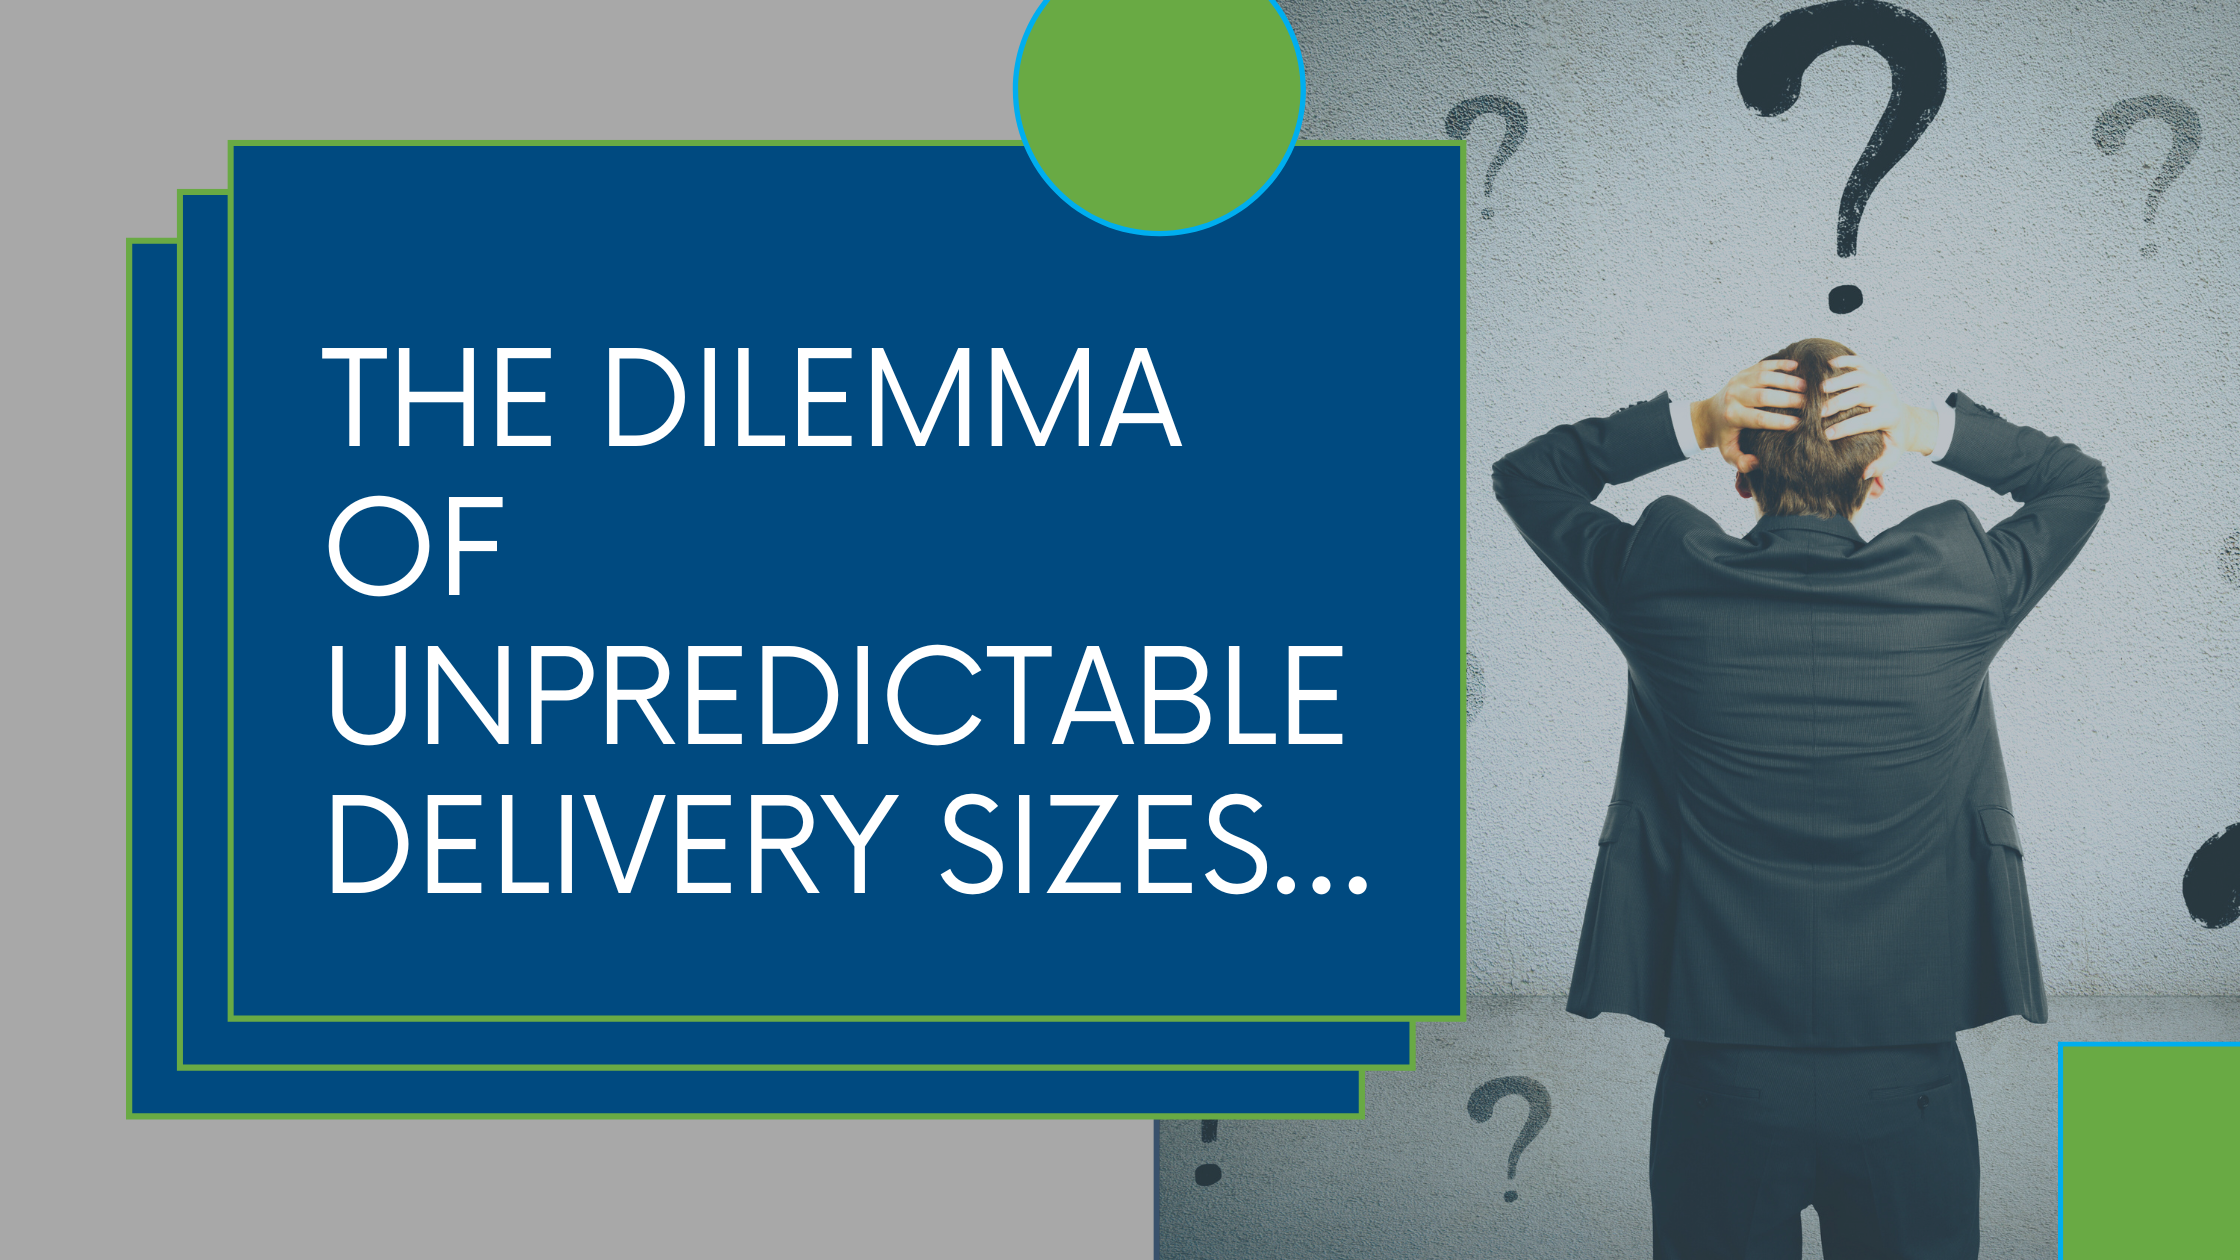 The Dilemma of Unpredictable Delivery Sizes